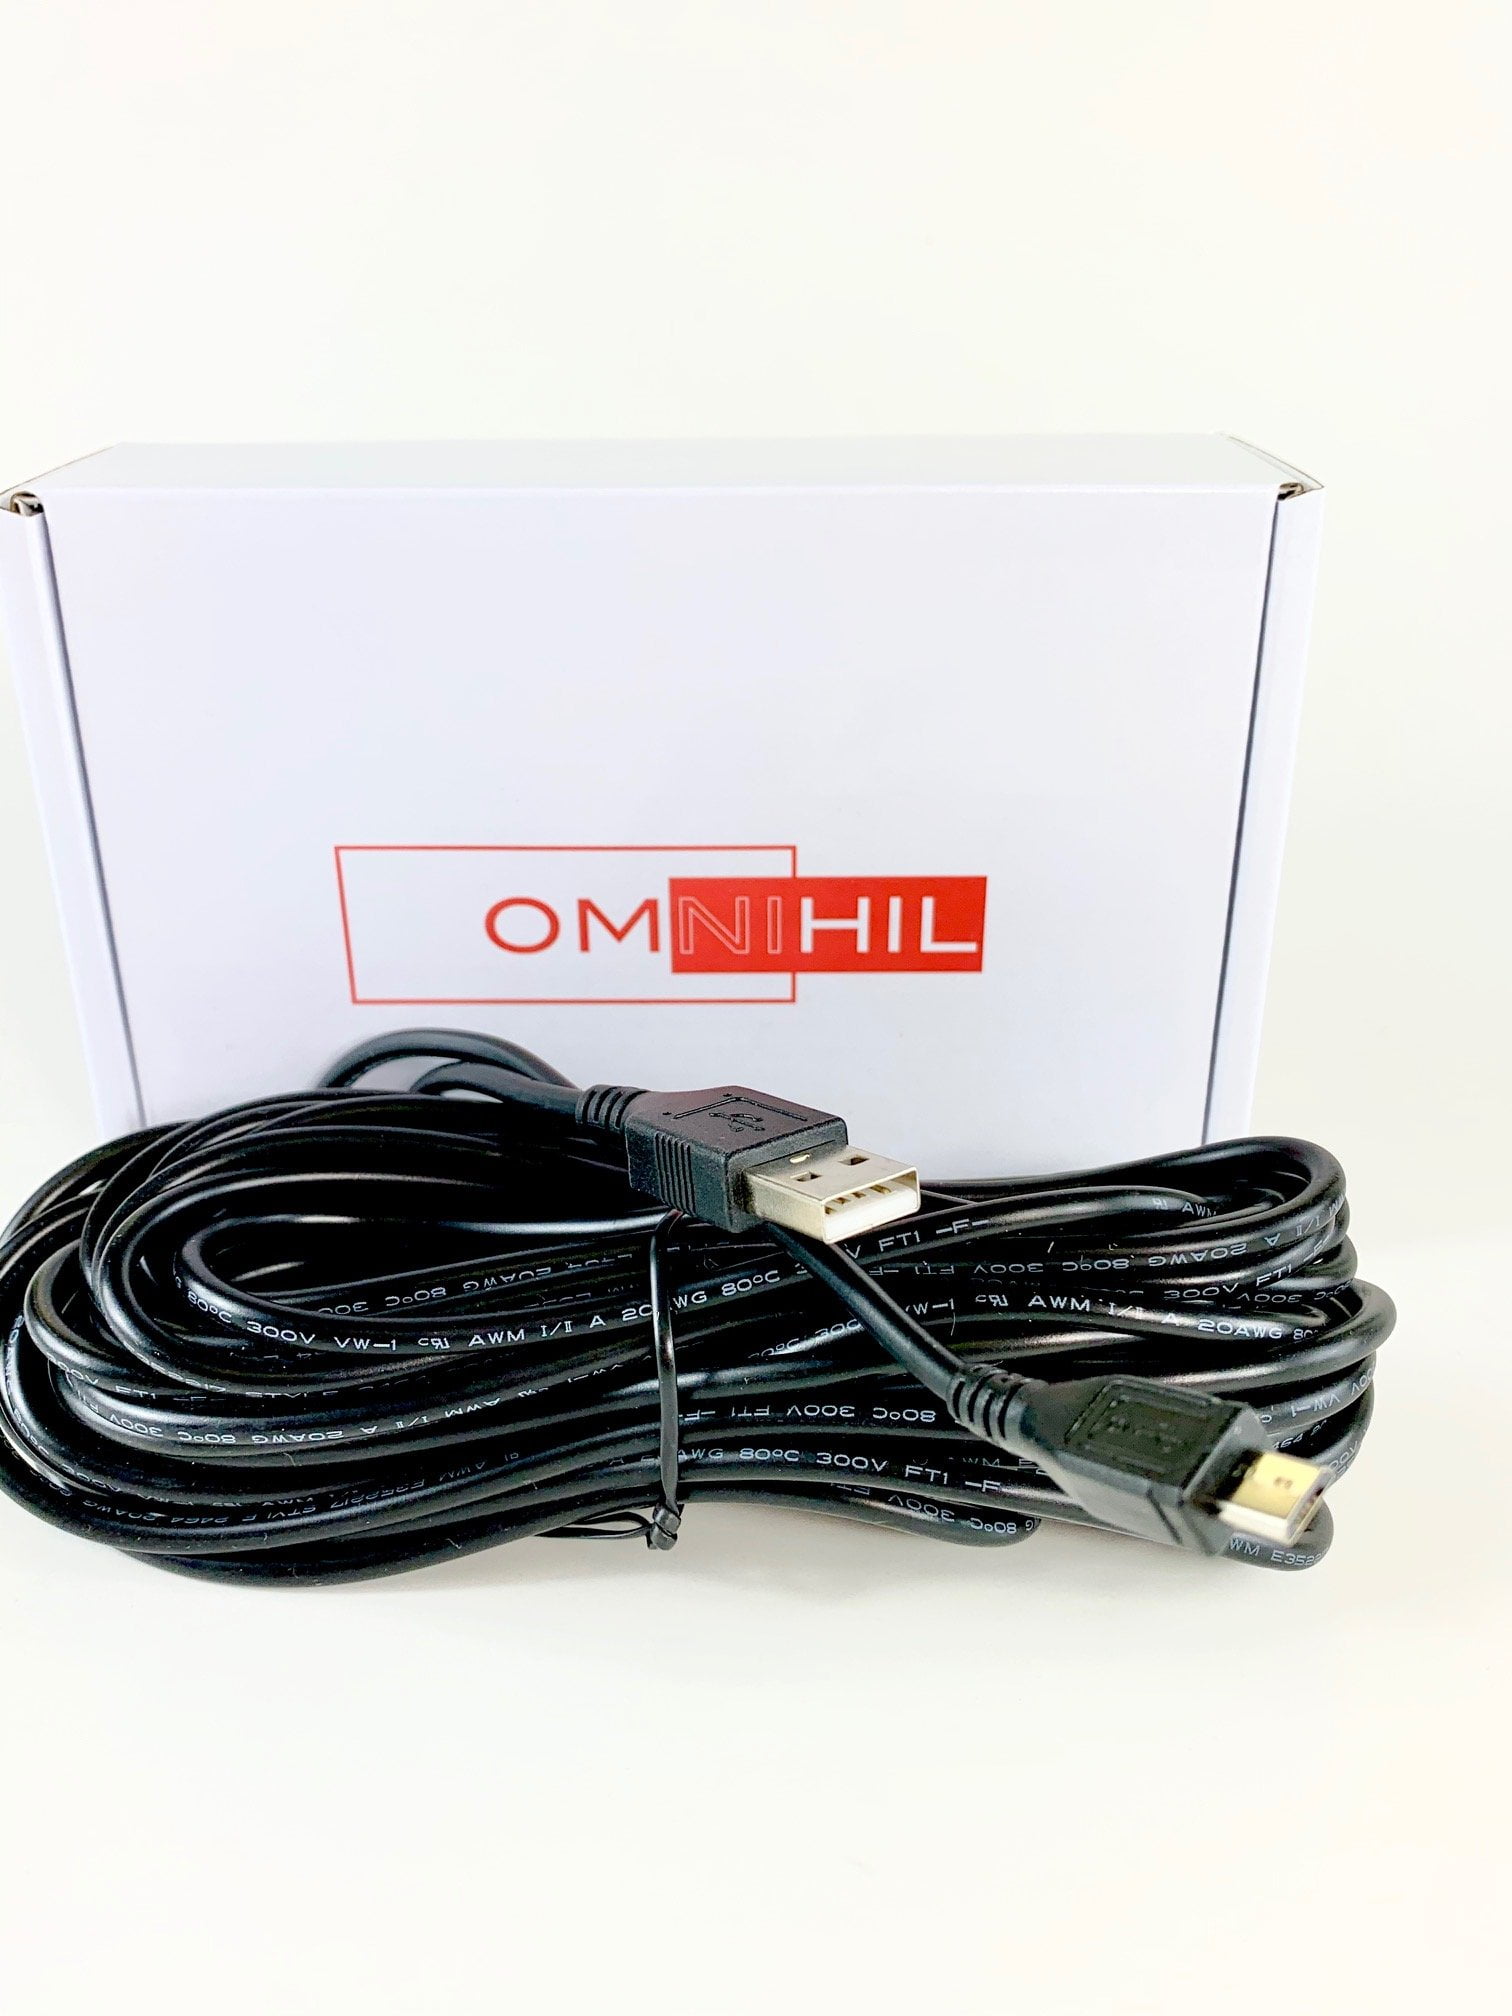 XD360U-EST OMNIHIL 8 Feet Long High Speed USB 2.0 Cable Compatible with Mitsubishi Projector Model